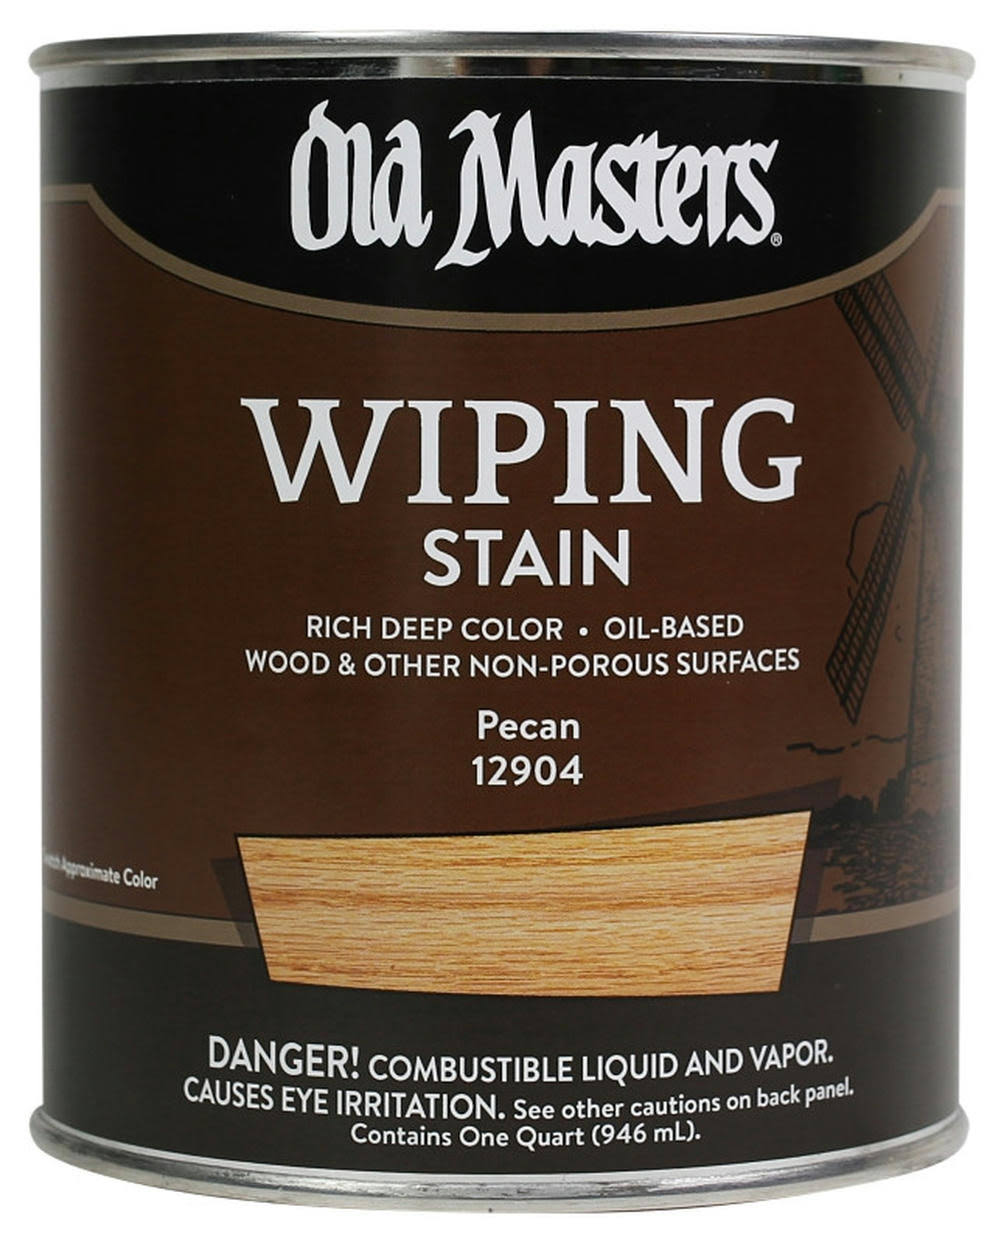 Old Masters Wiping Stain - 1 Quart, Pecan